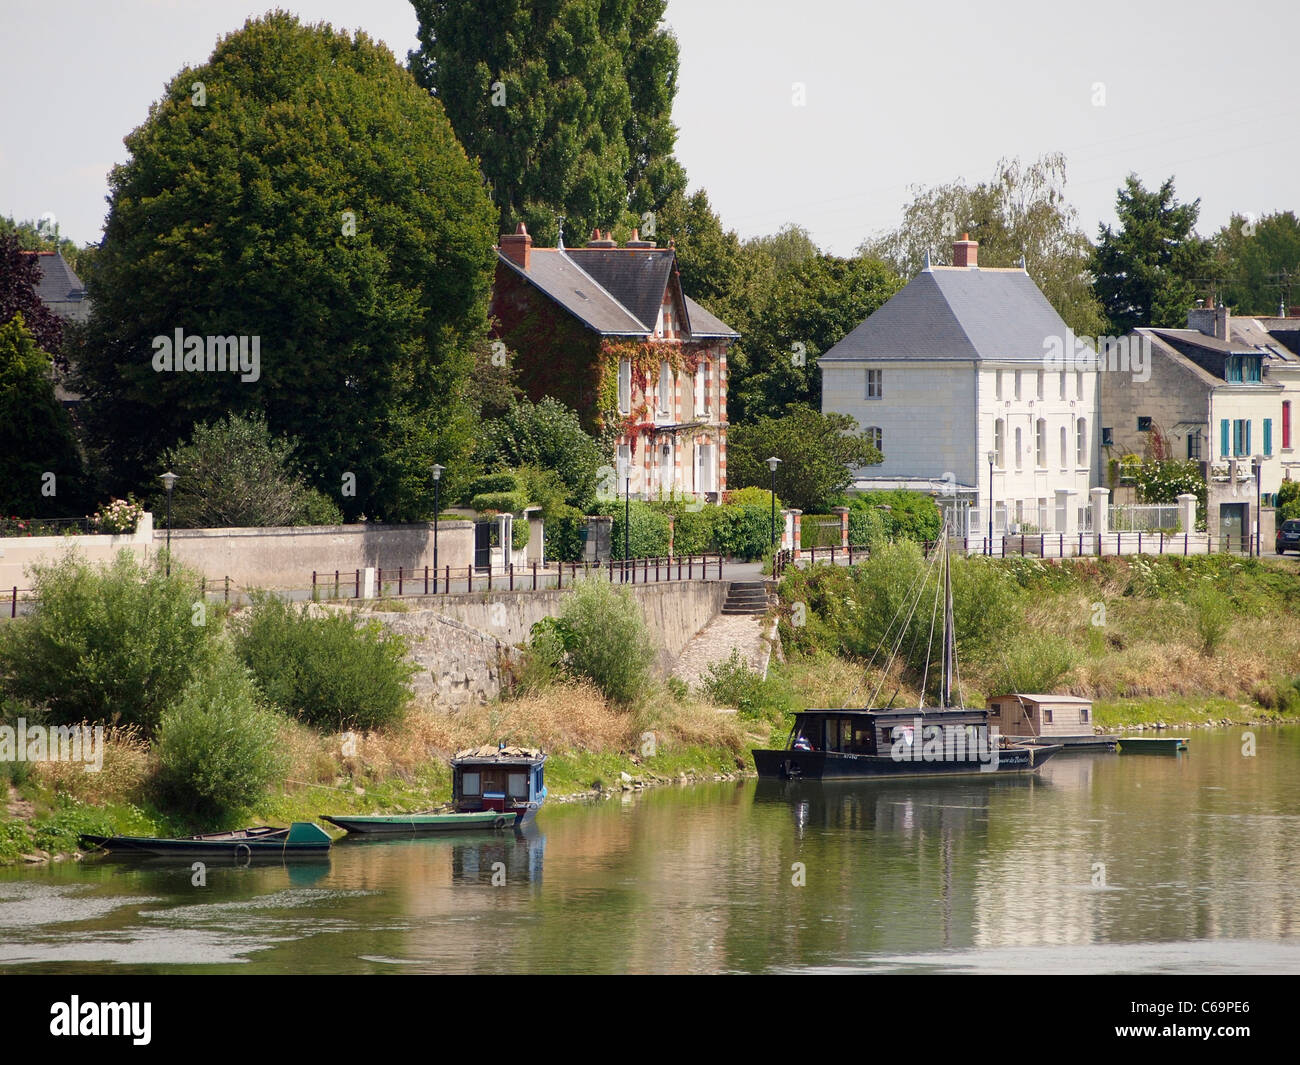 Typical French houses on Ile d'Offard island in the Loire river near Saumur, France Stock Photo